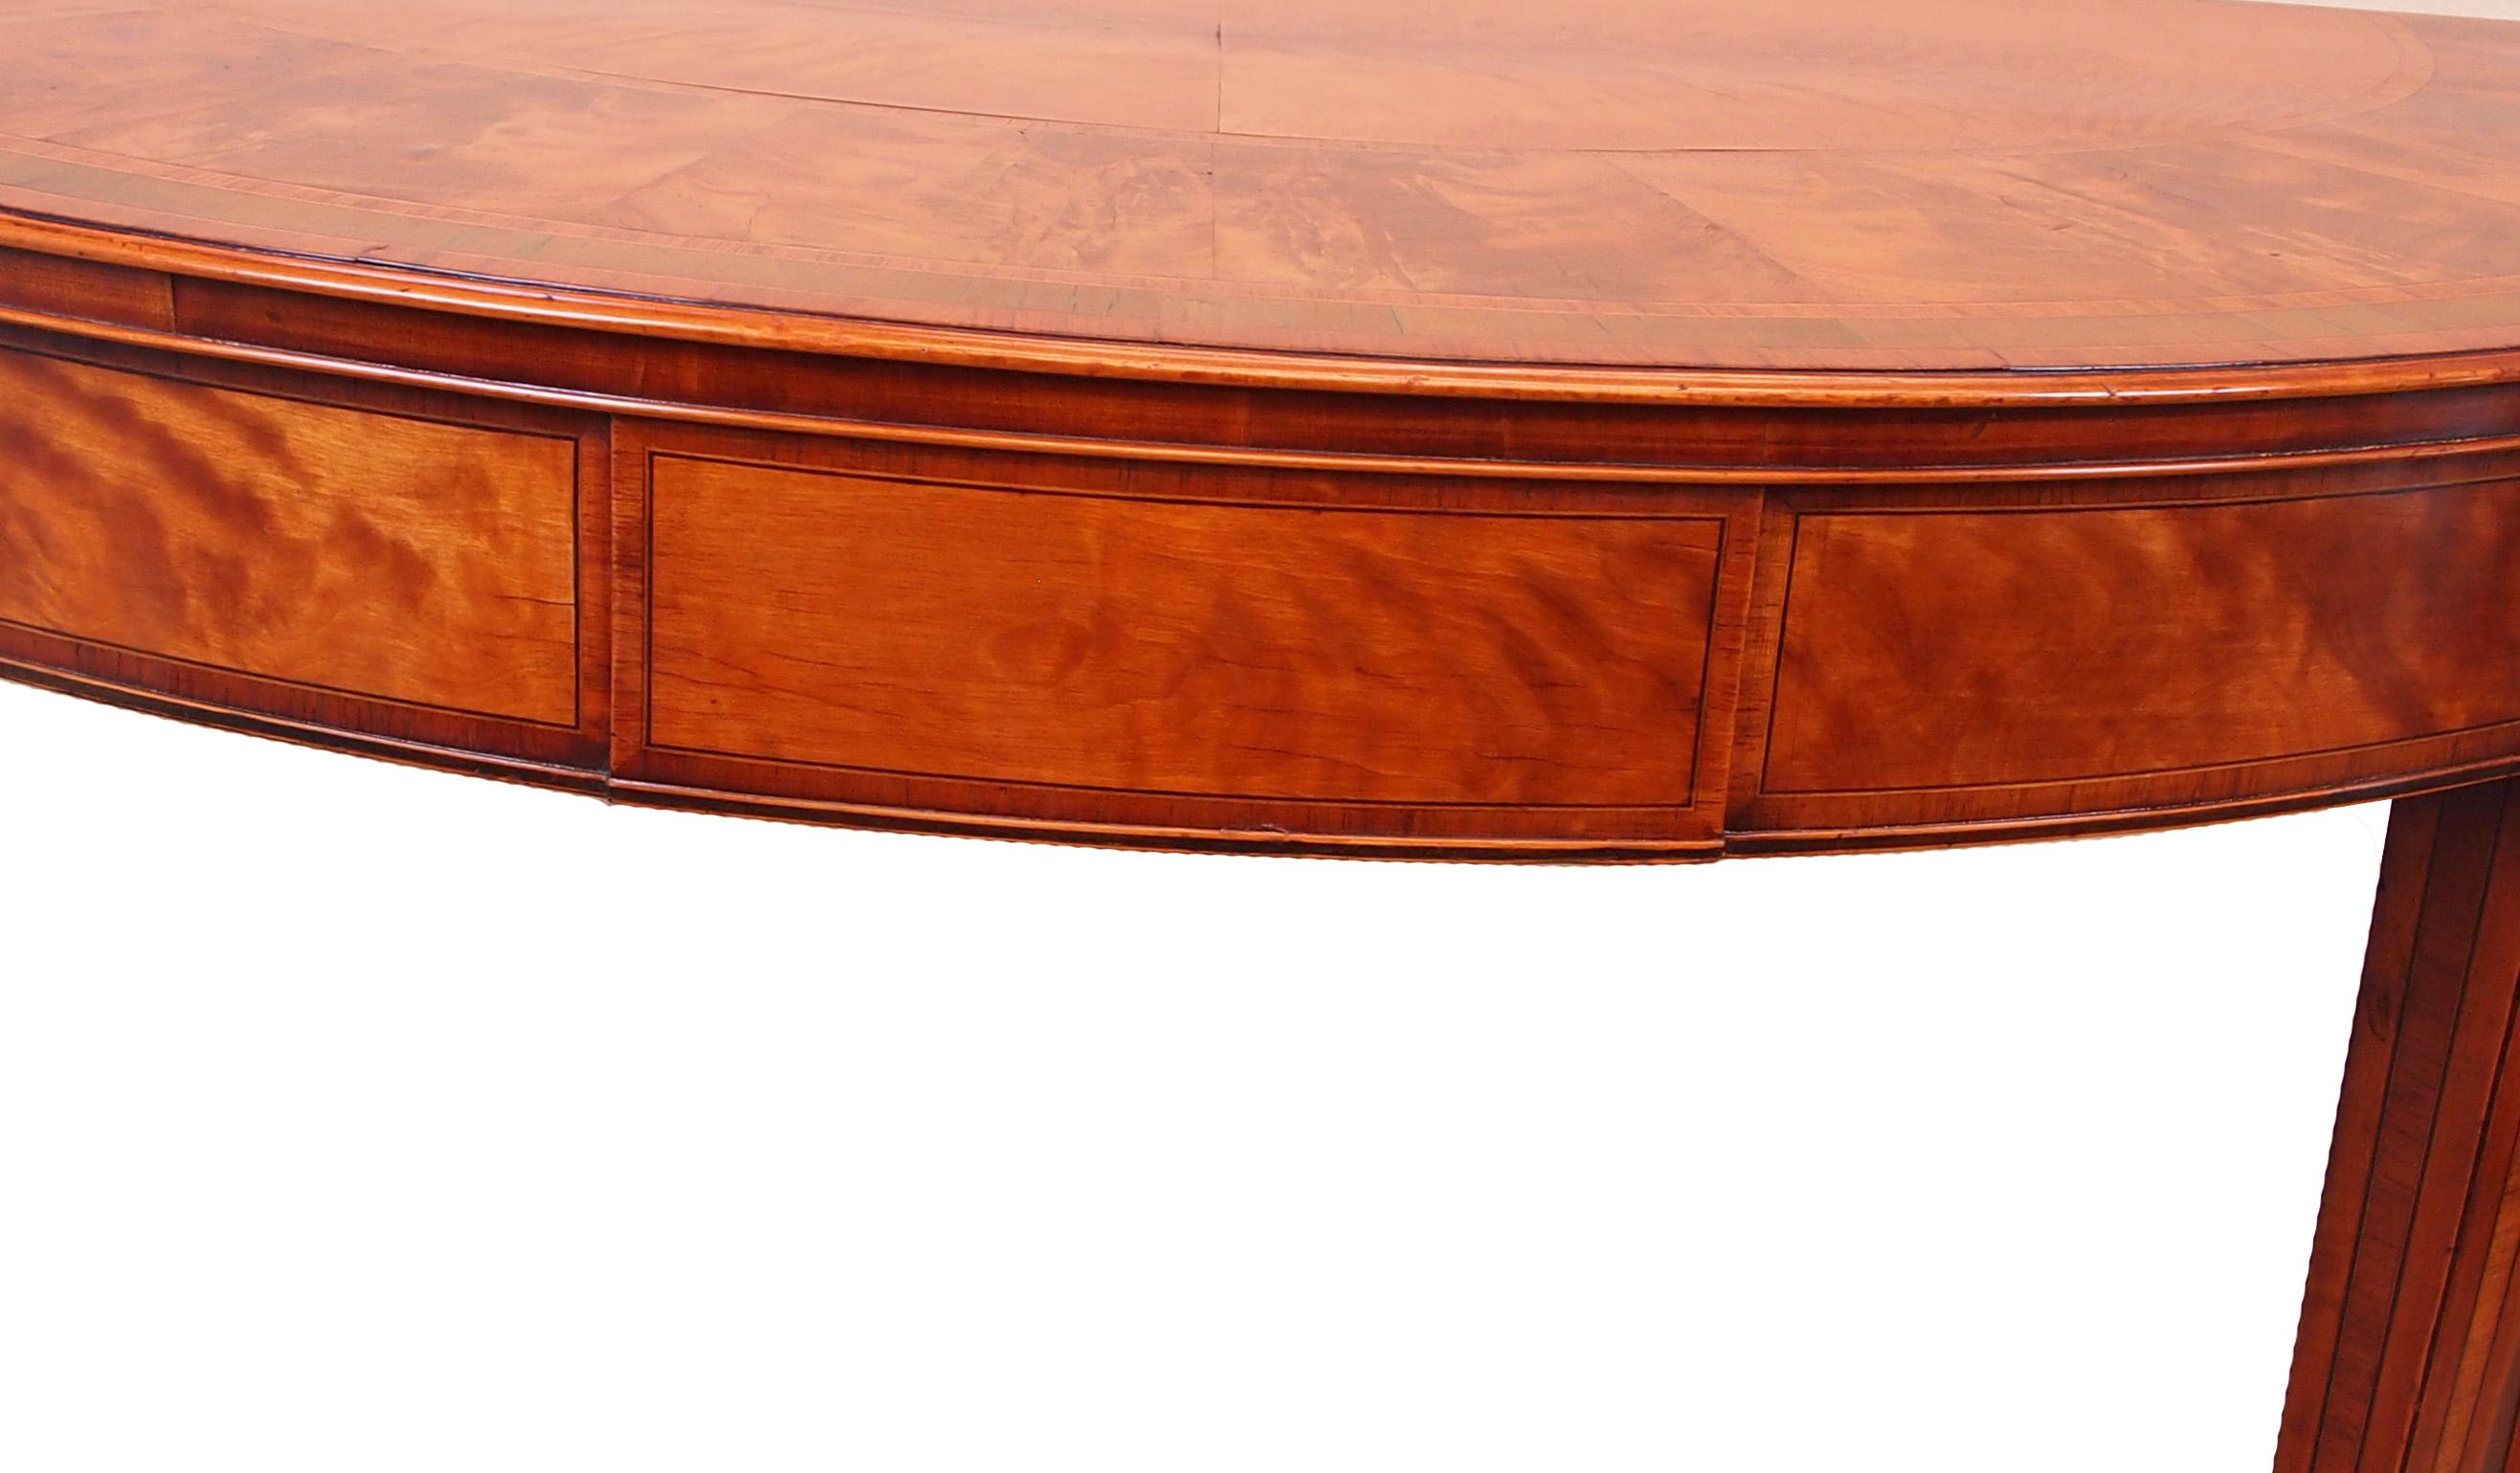 A very fine quality 18th century George III period
satinwood and Harewood demilune shaped pier table
having superbly figured, inlaid and crossbanded top over
shallow frieze raised on elegant square tapered legs with
banded decoration and